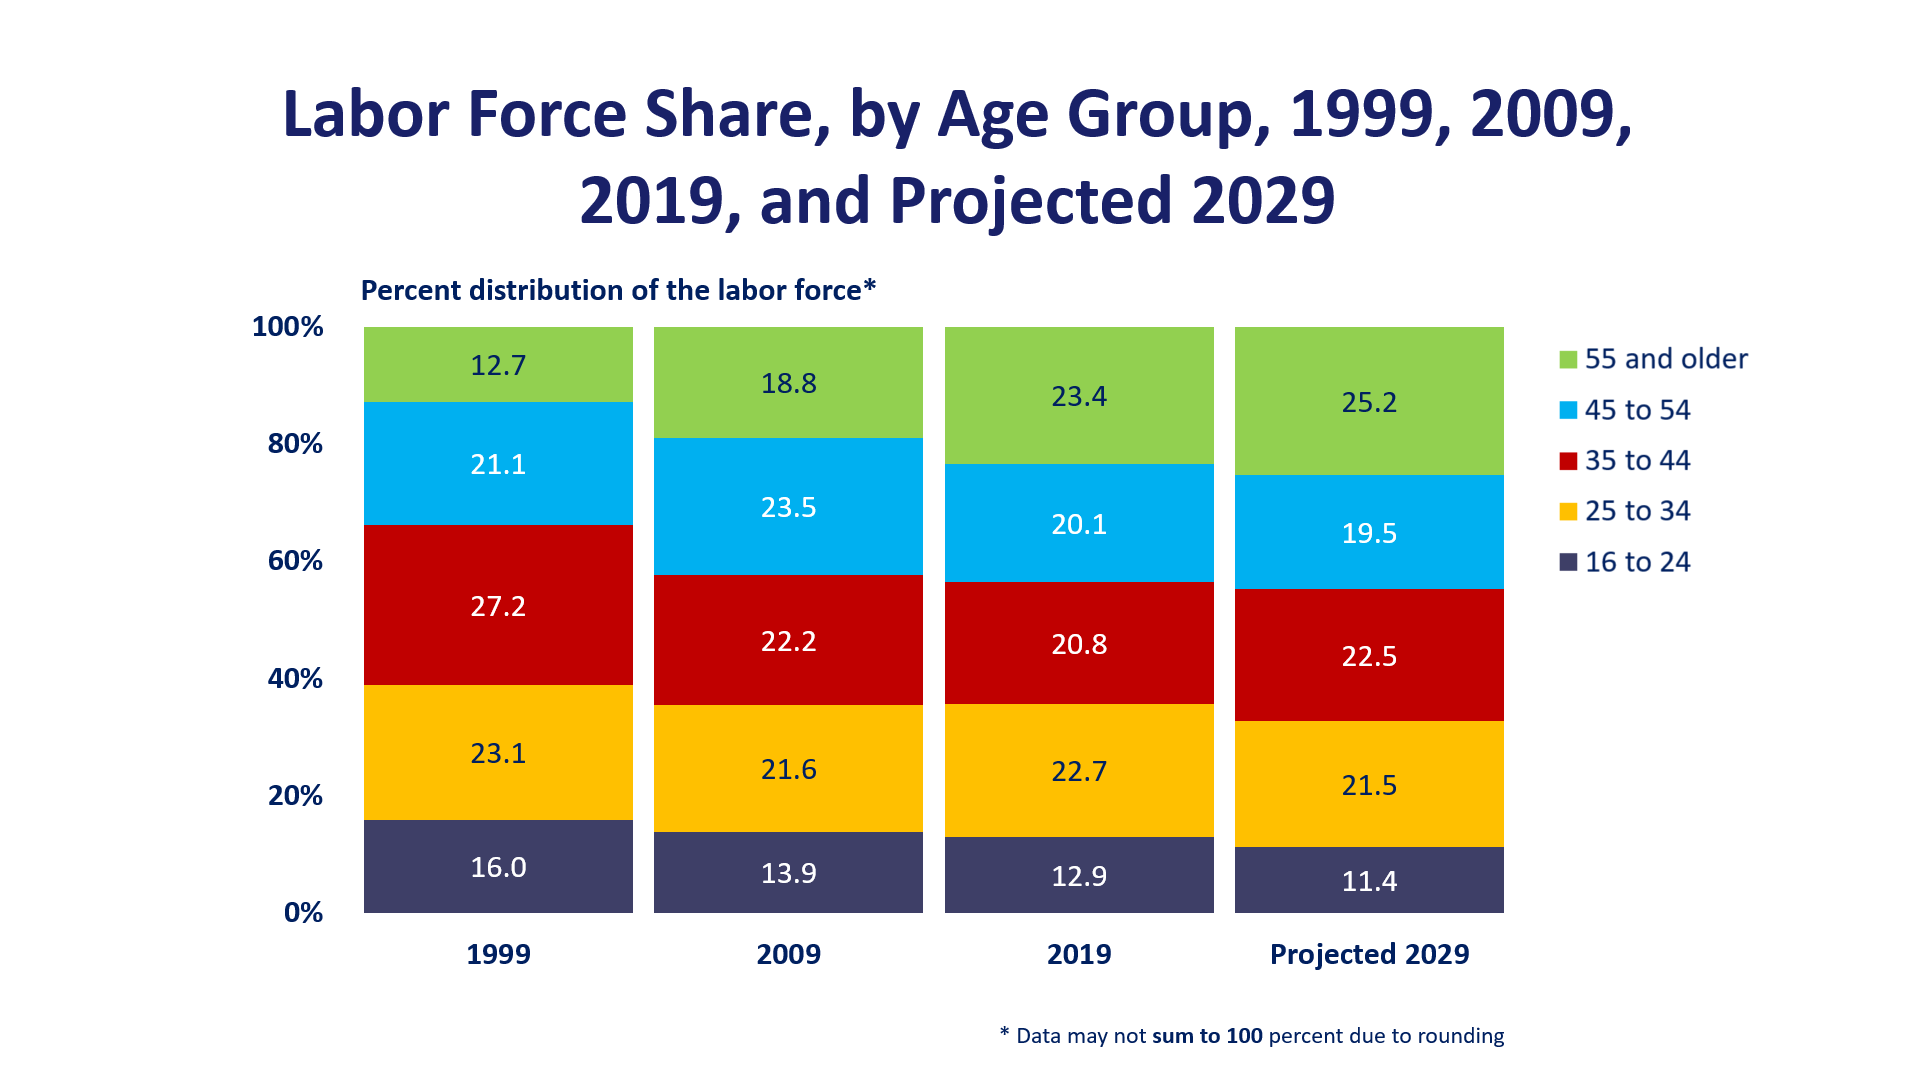 Labor force share, by age group, 1999, 2009, 2019, and projected 2029